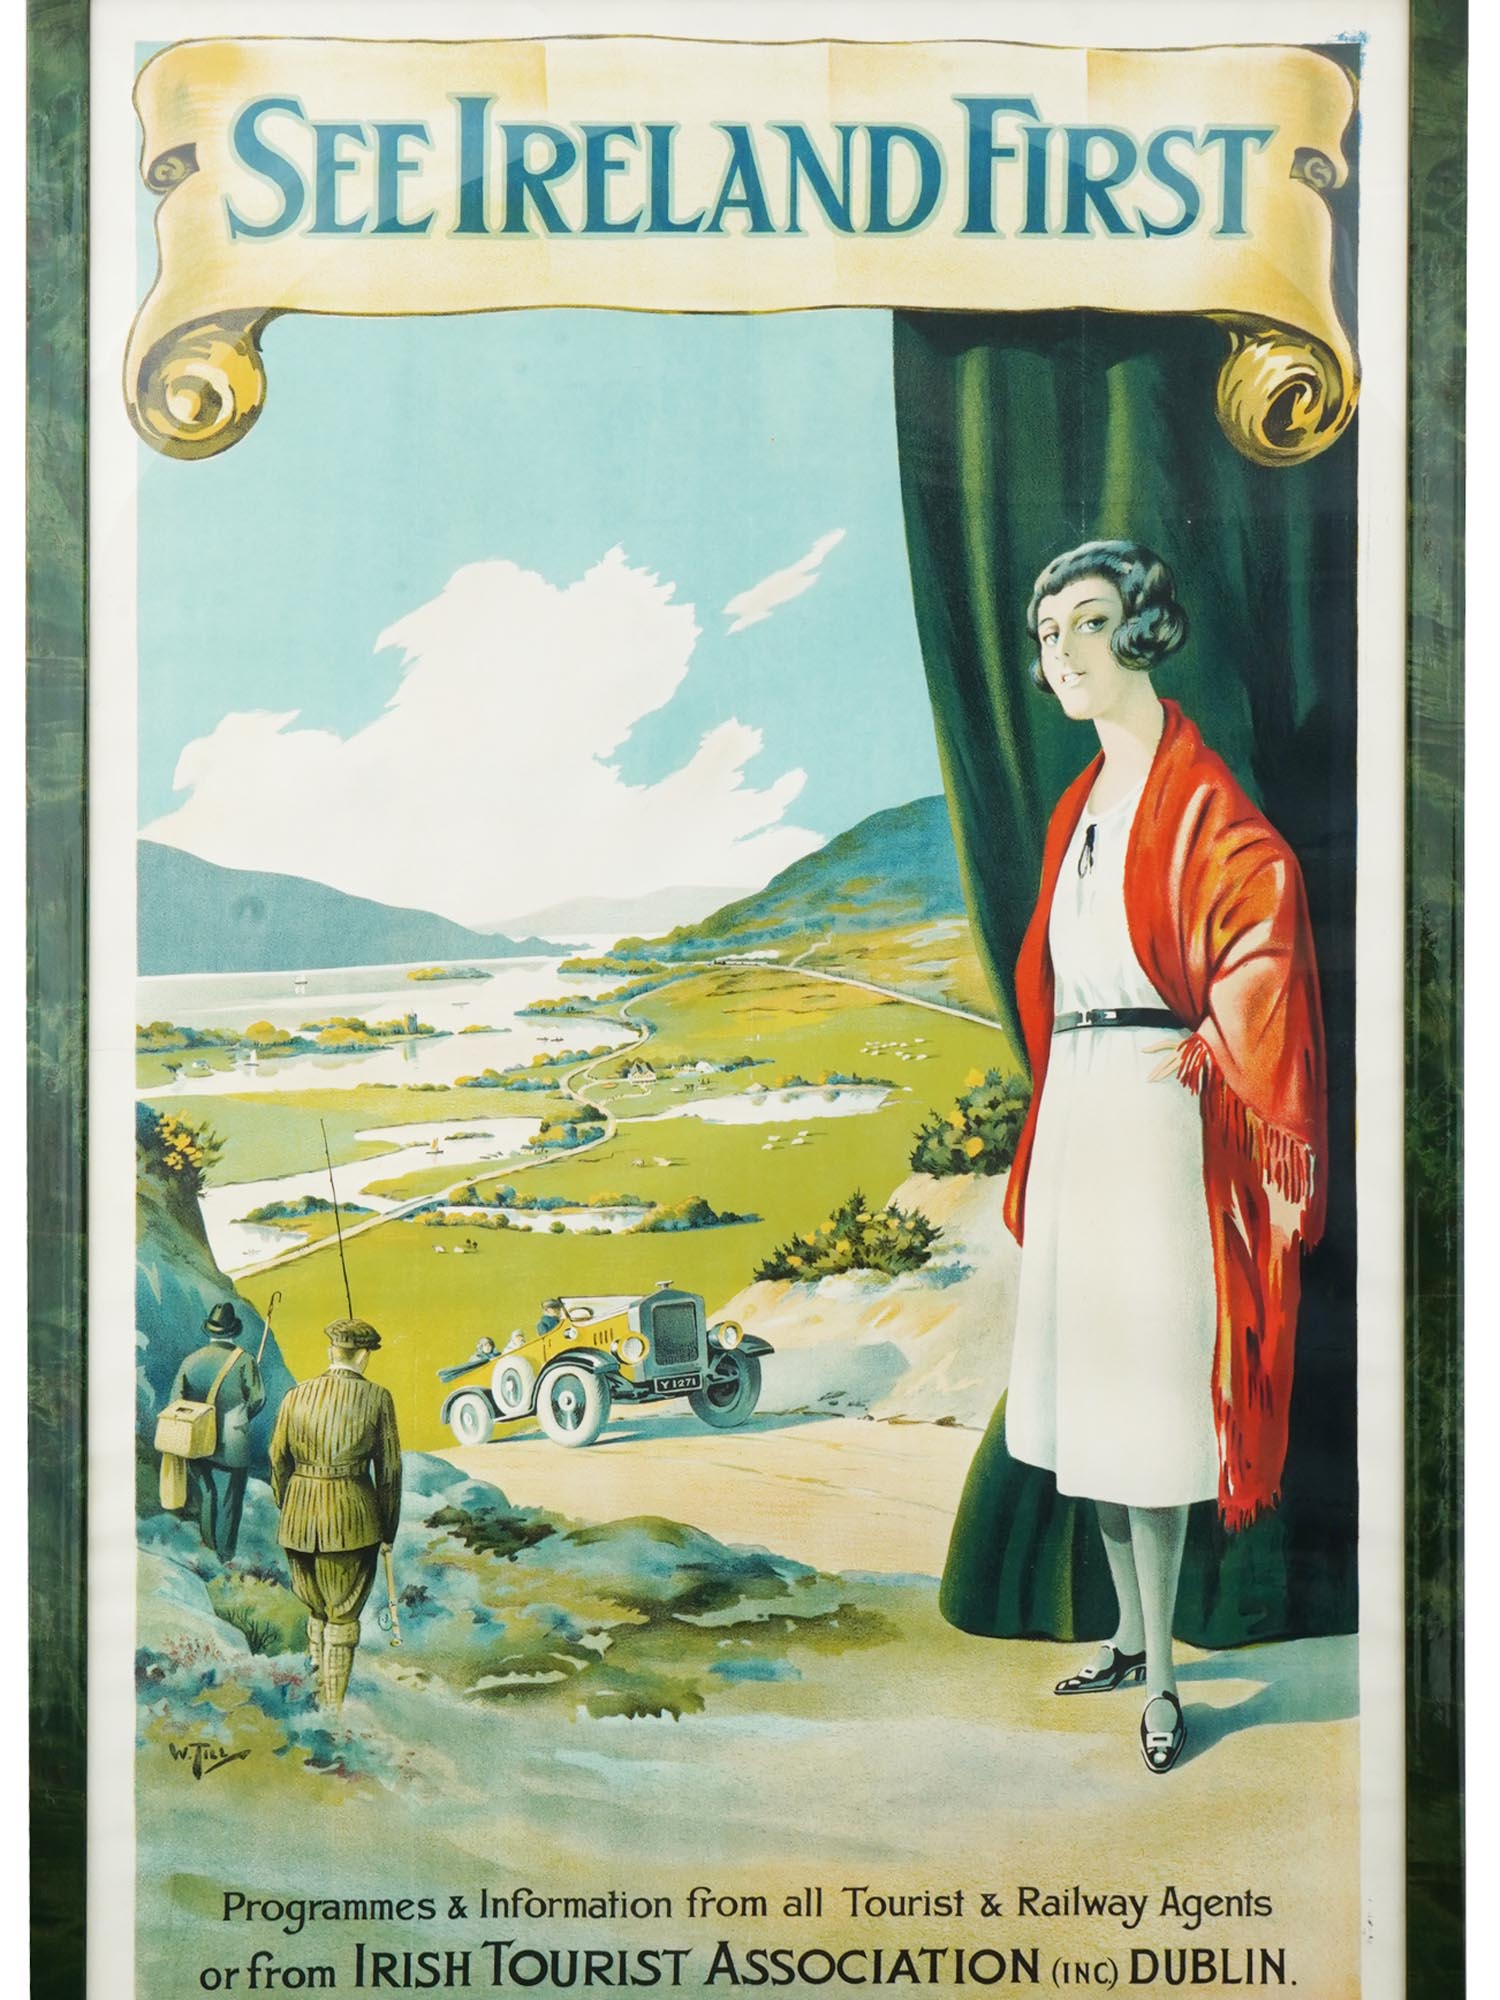 VINTAGE TRAVEL POSTER SEE IRELAND FIRST BY W. TILL PIC-1